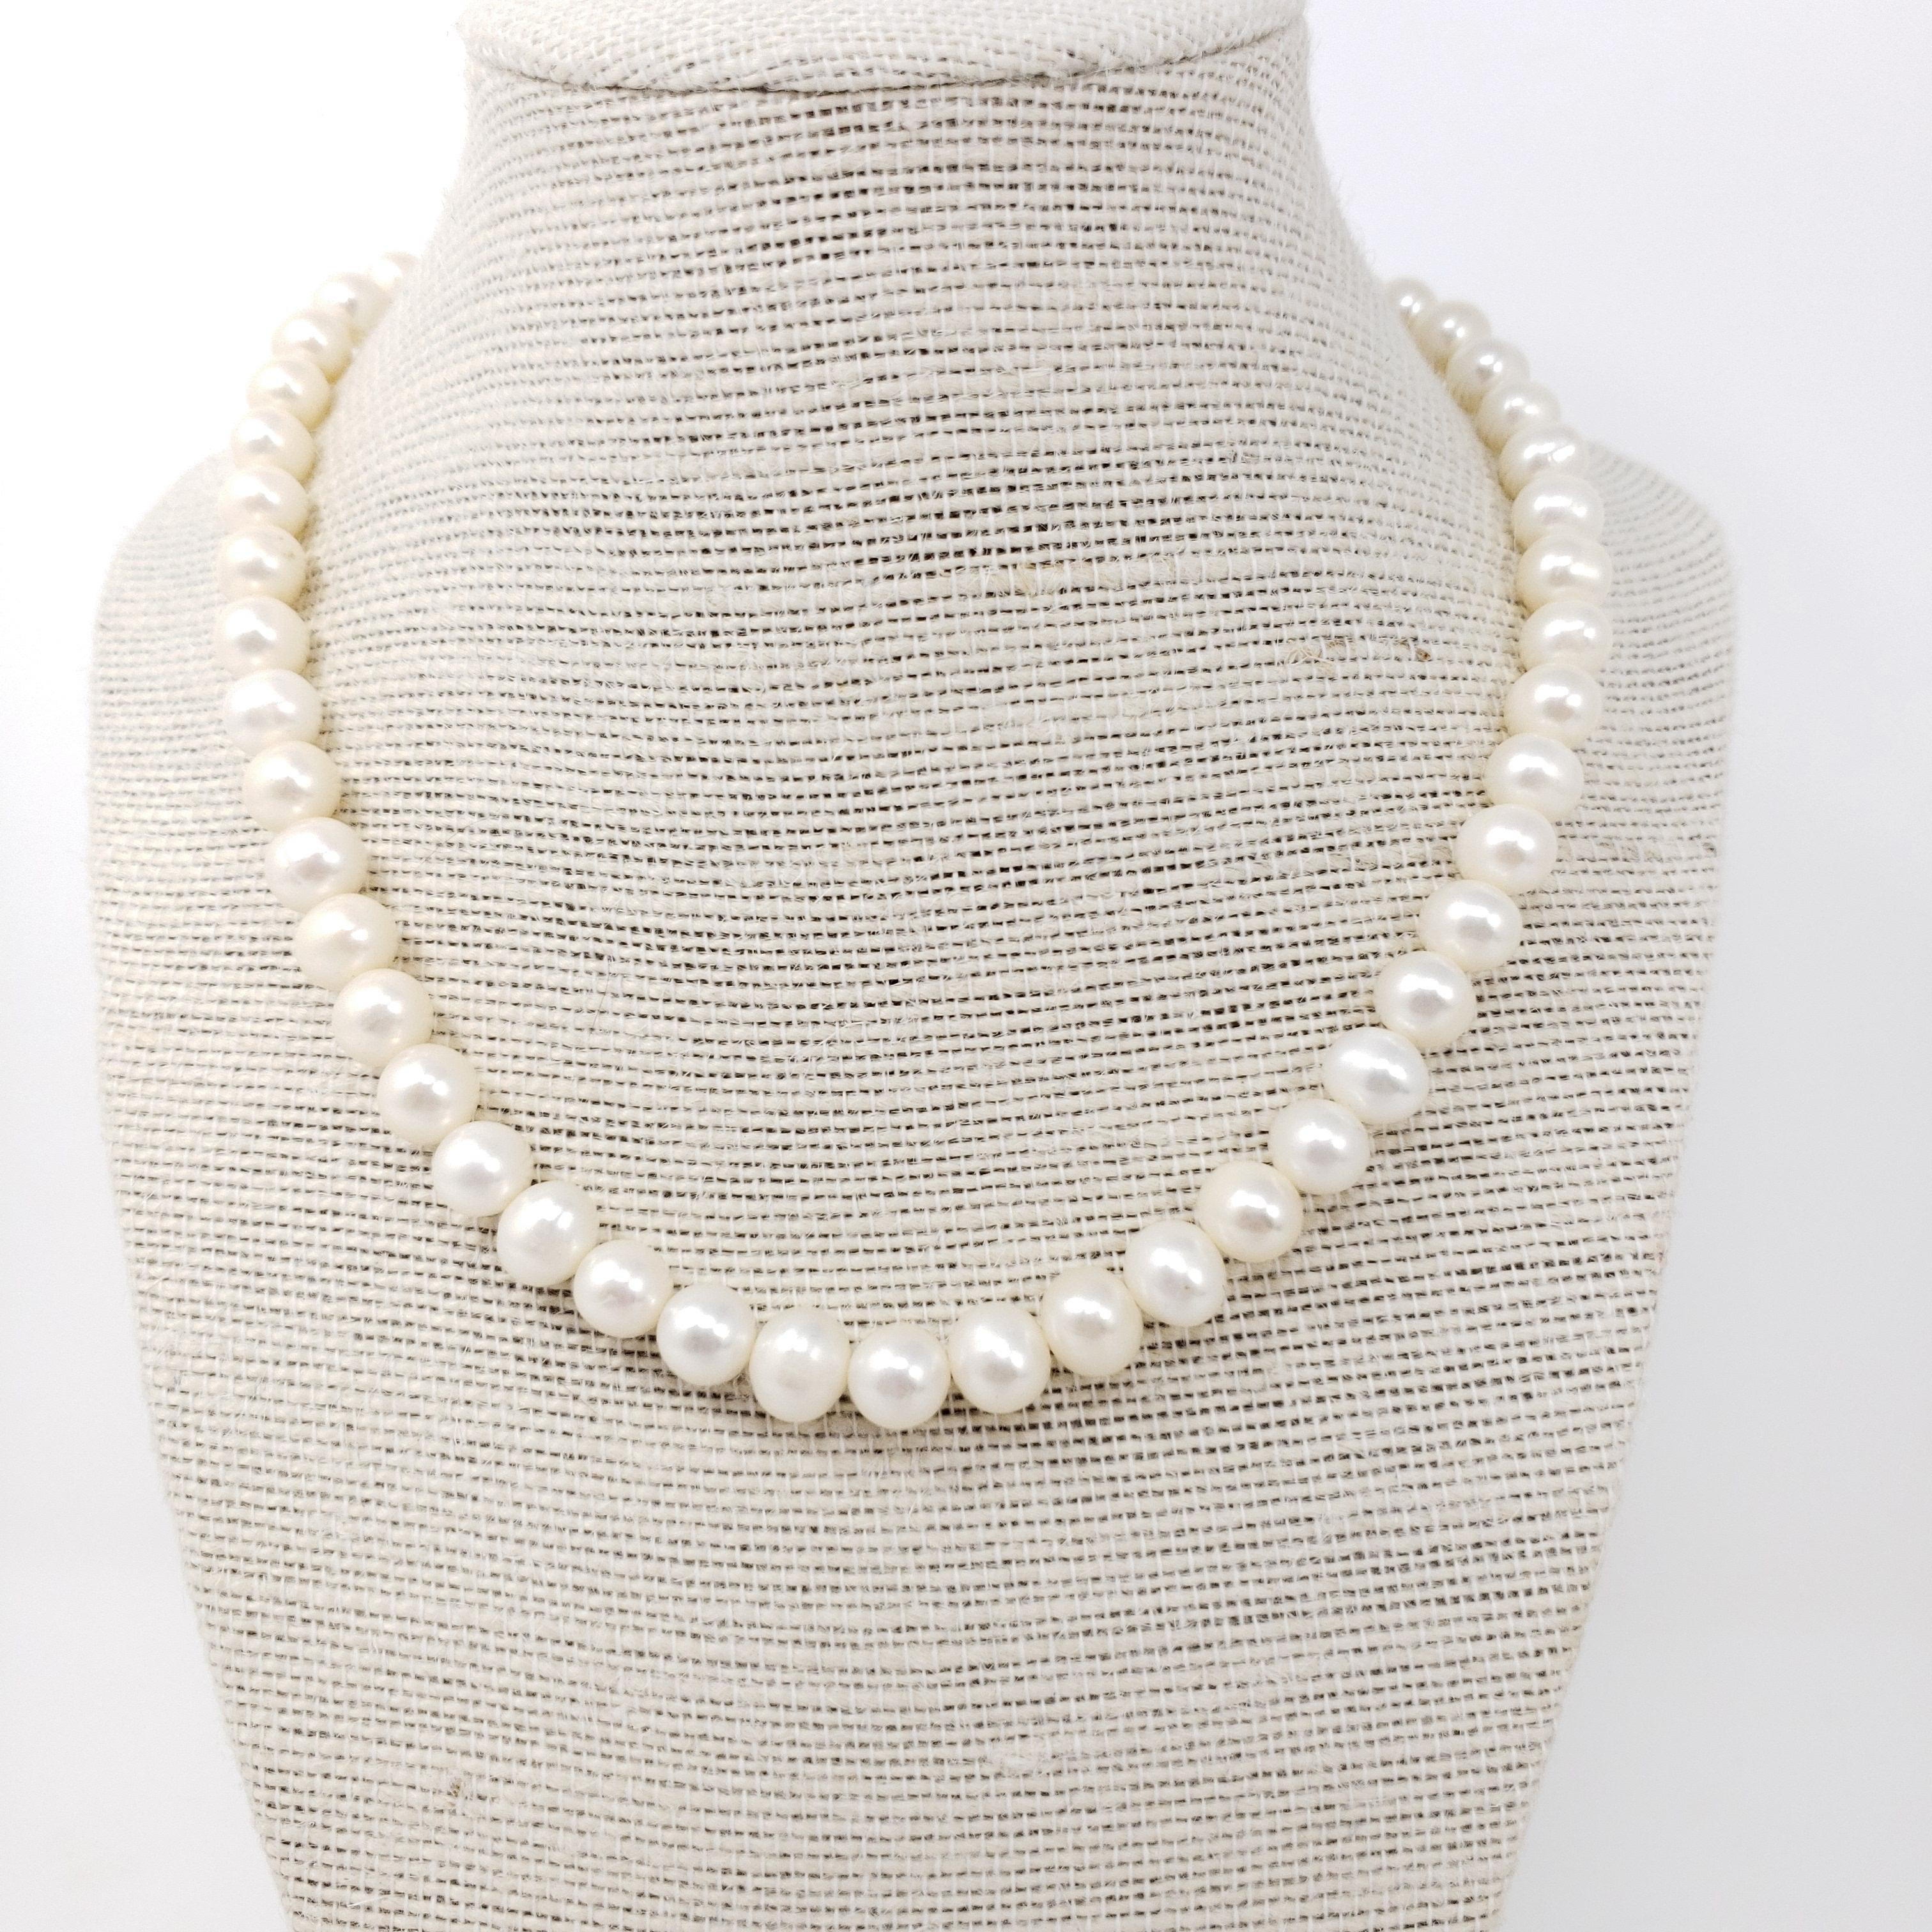 Vintage pearl necklace, featuring a single, 16.5 inch strand of white pearls with a sterling silver clasp. An exquisite accessory!